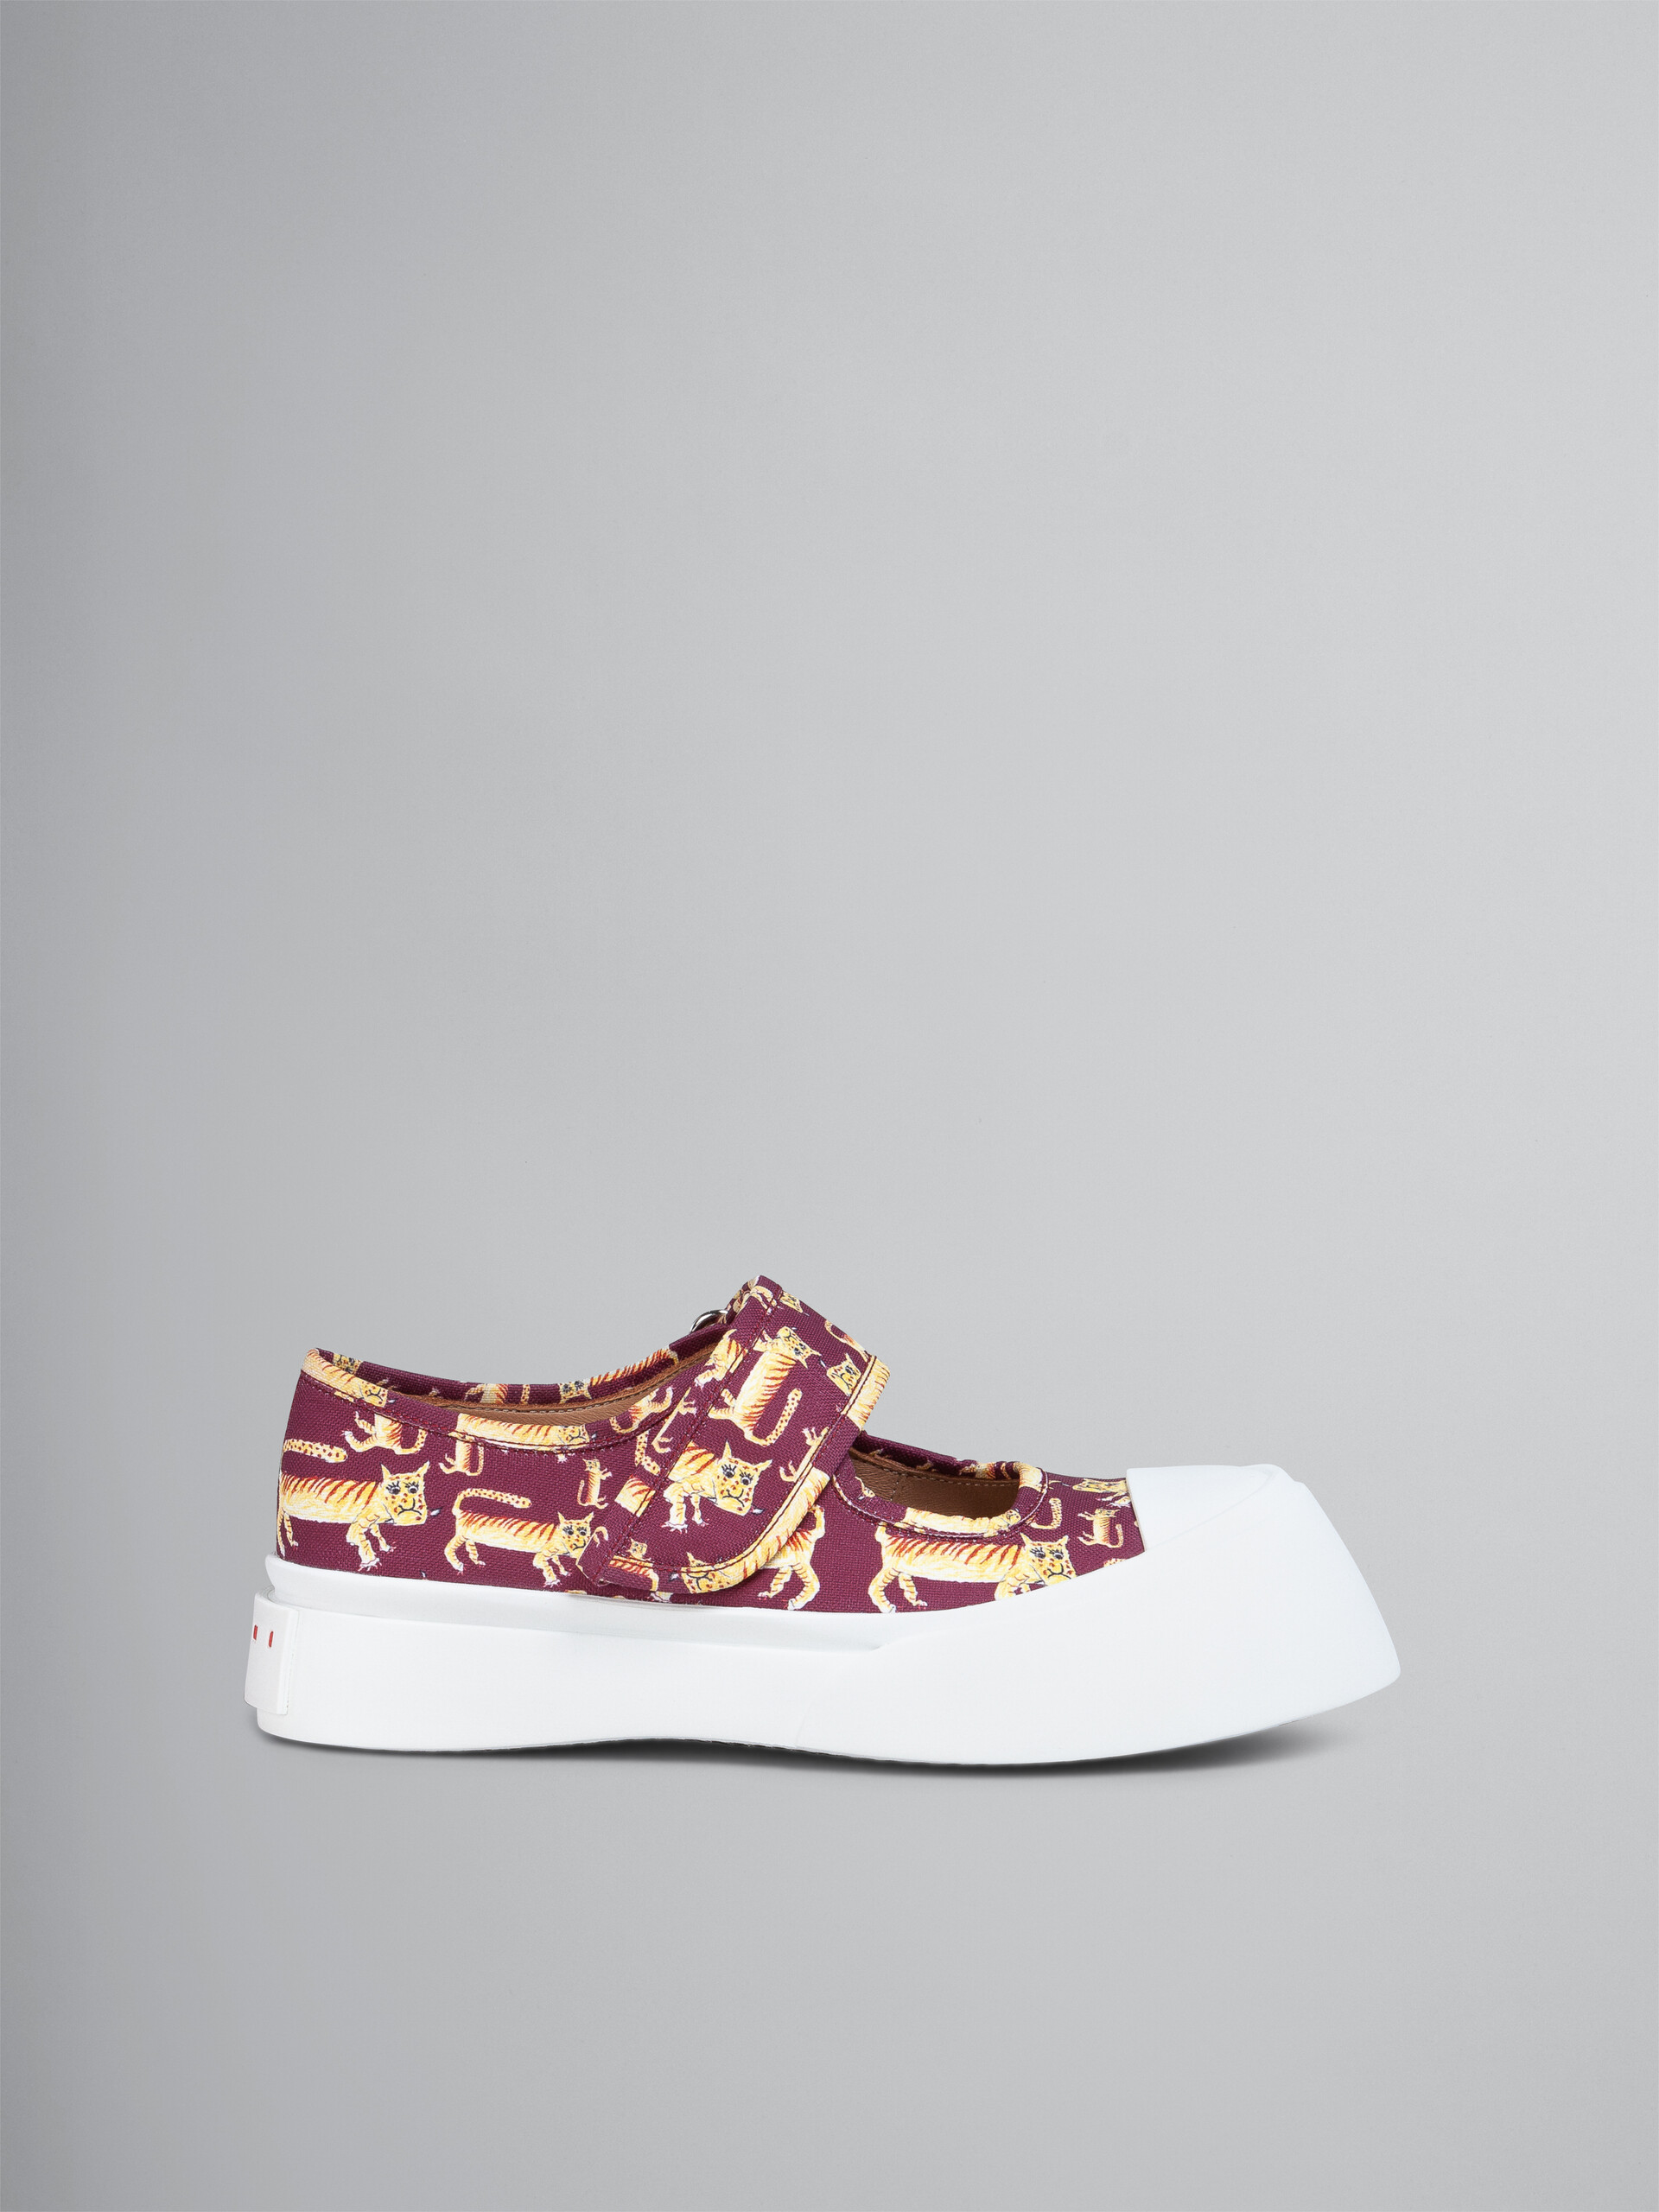 Tiger print canvas PABLO Mary-Jane sneaker - Sneakers - Image 1